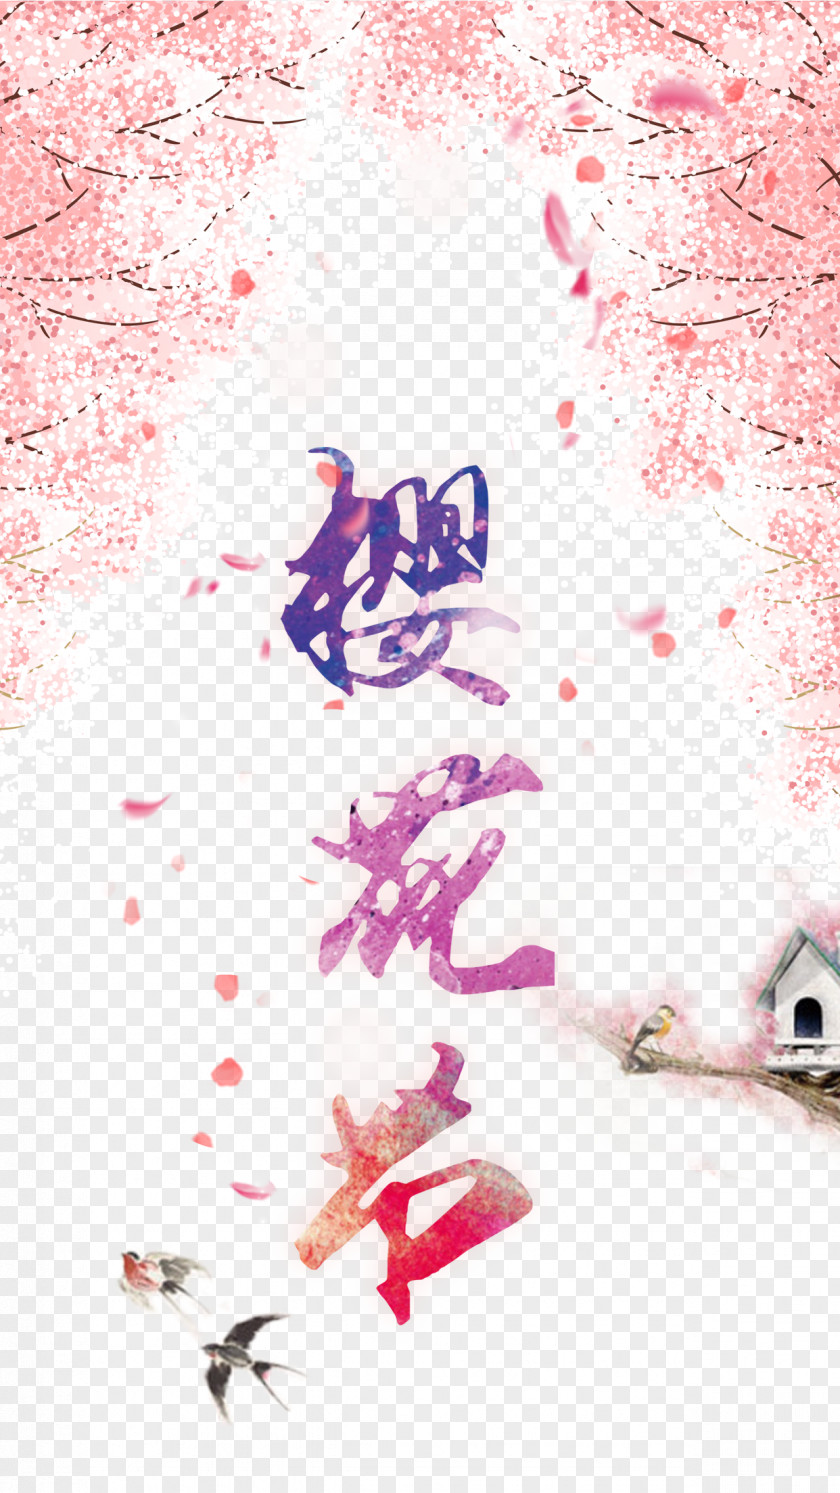 Colorful Cherry Blossom Festival National Graphic Design PNG